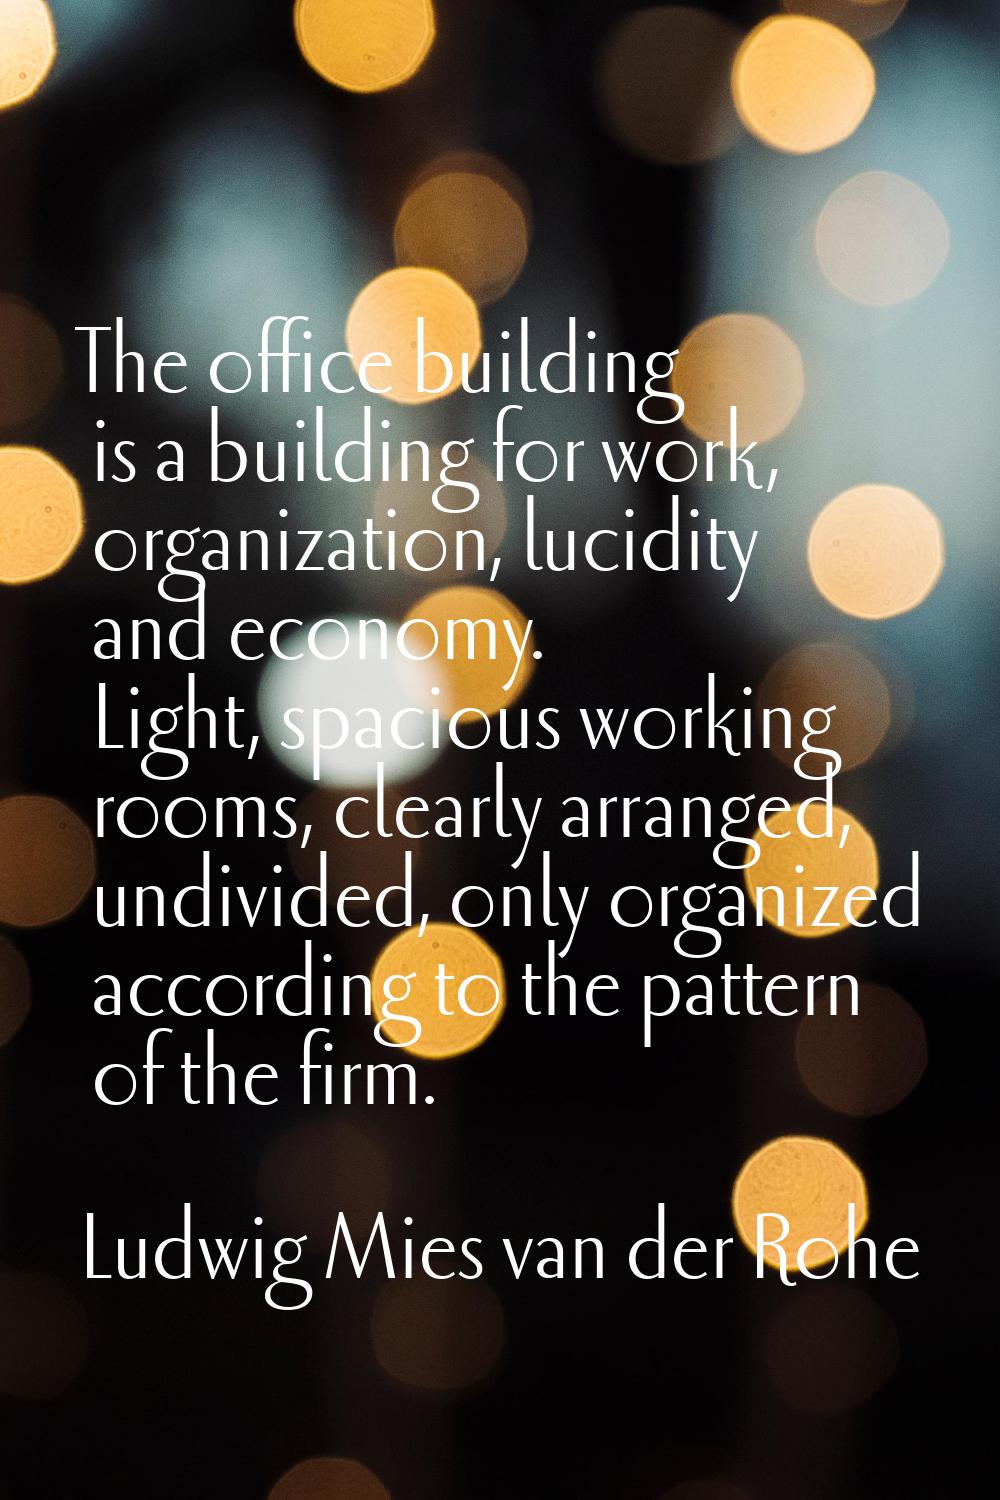 The office building is a building for work, organization, lucidity and economy. Light, spacious wor